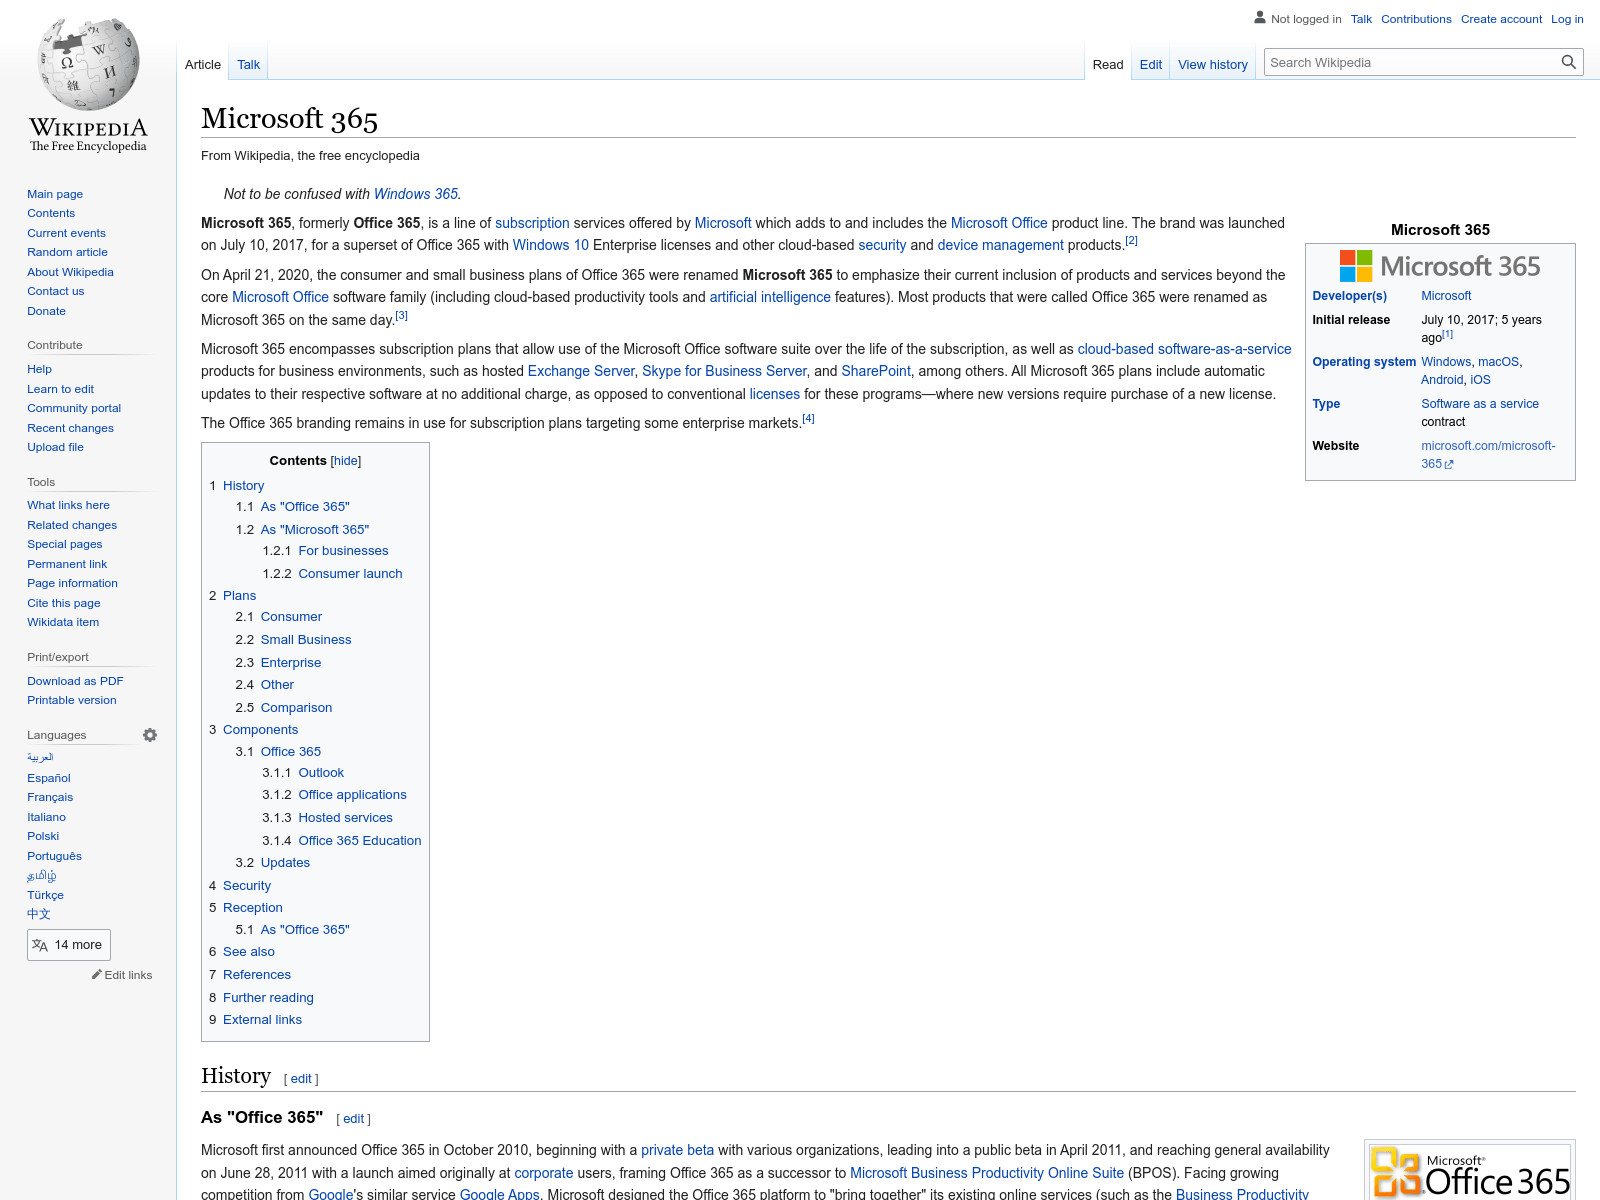 Example of the Wikipedia page used to avoid URL detection  